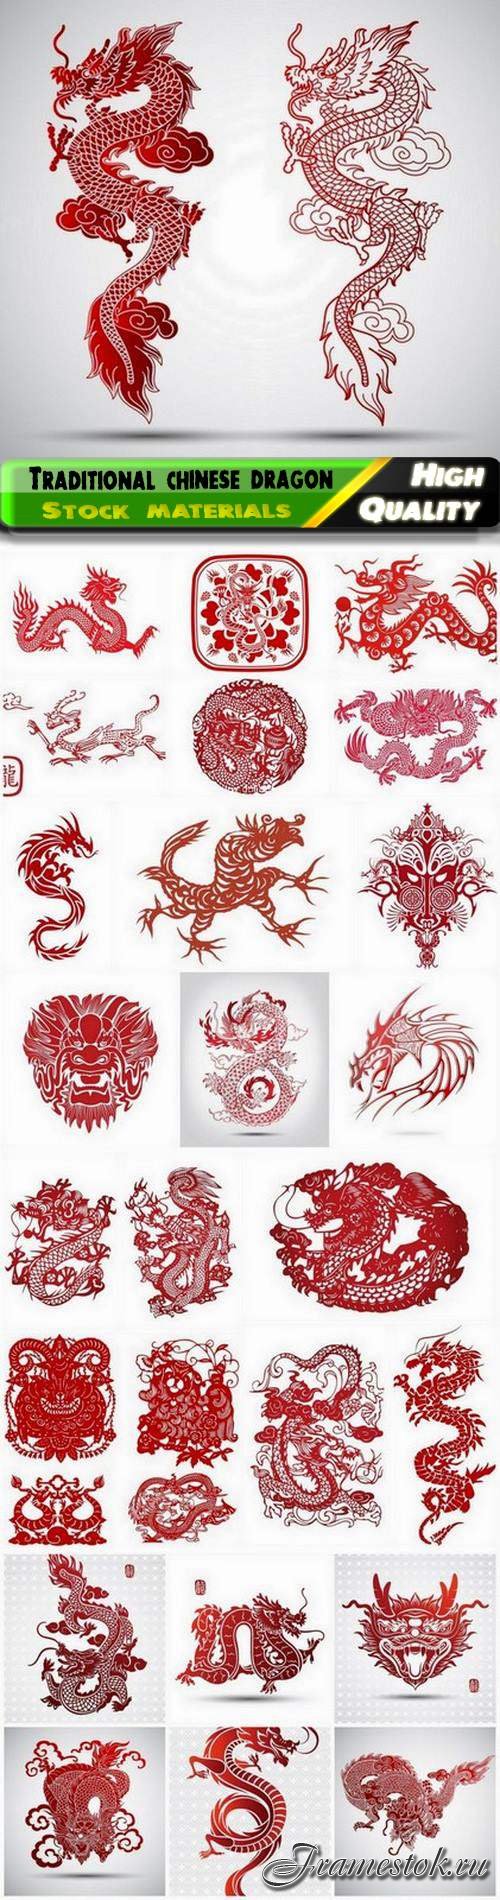 Illustration of traditional chinese dragon and snake - 25 Epsv